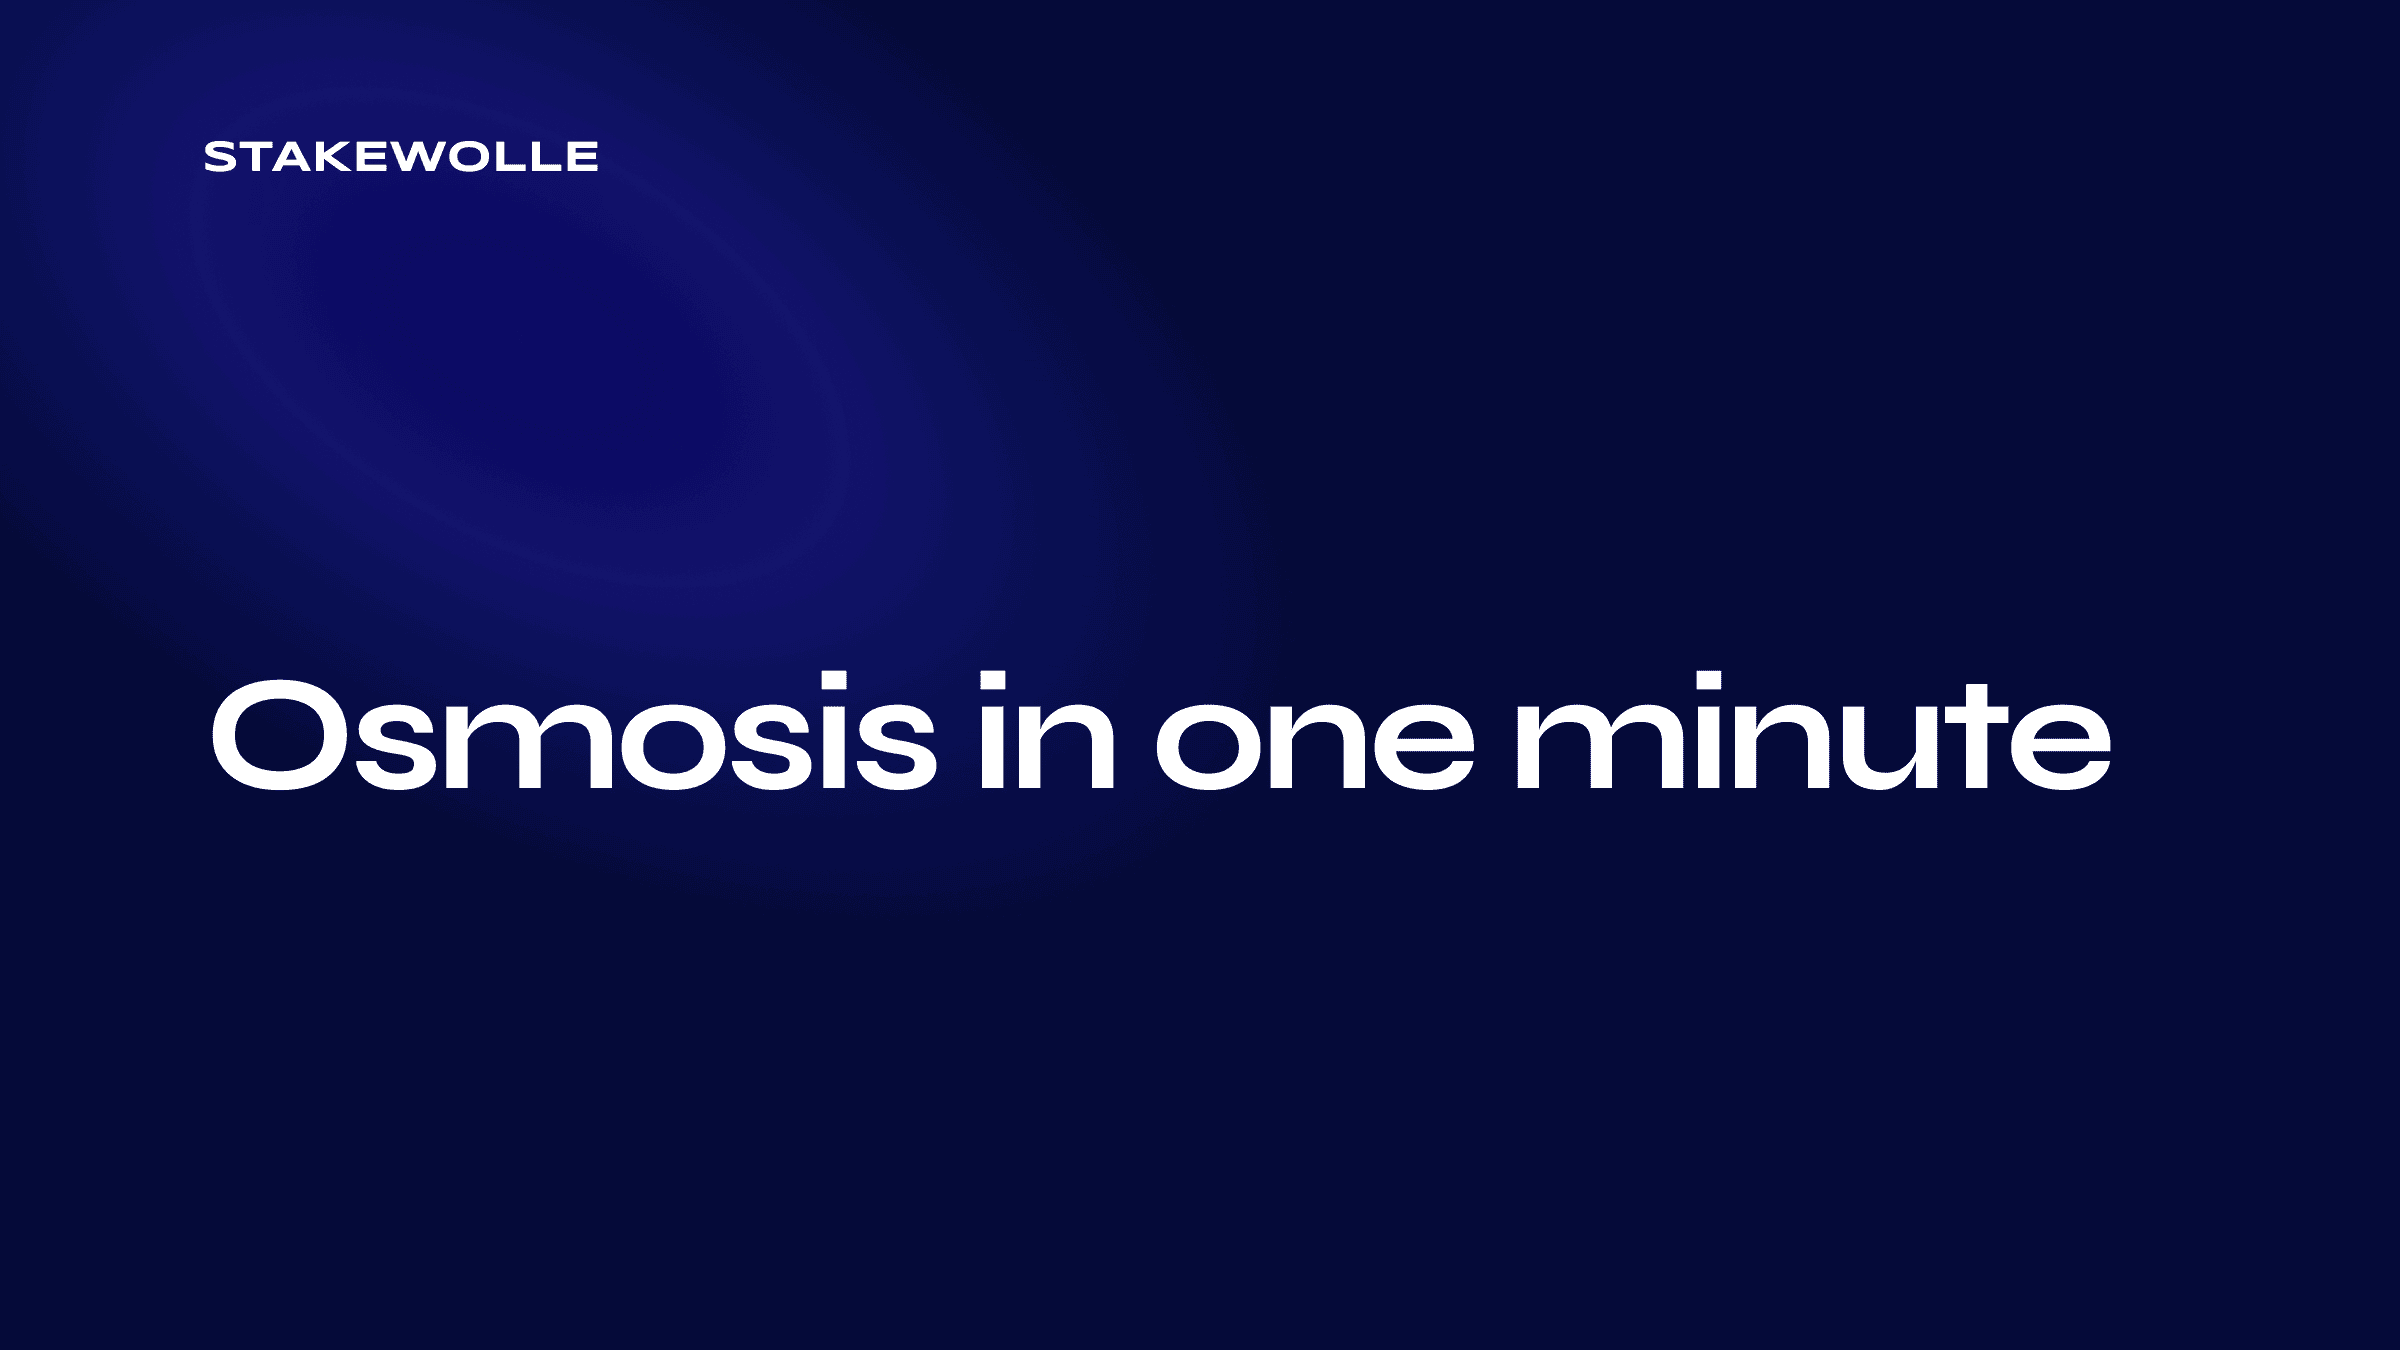 Osmosis in one minute